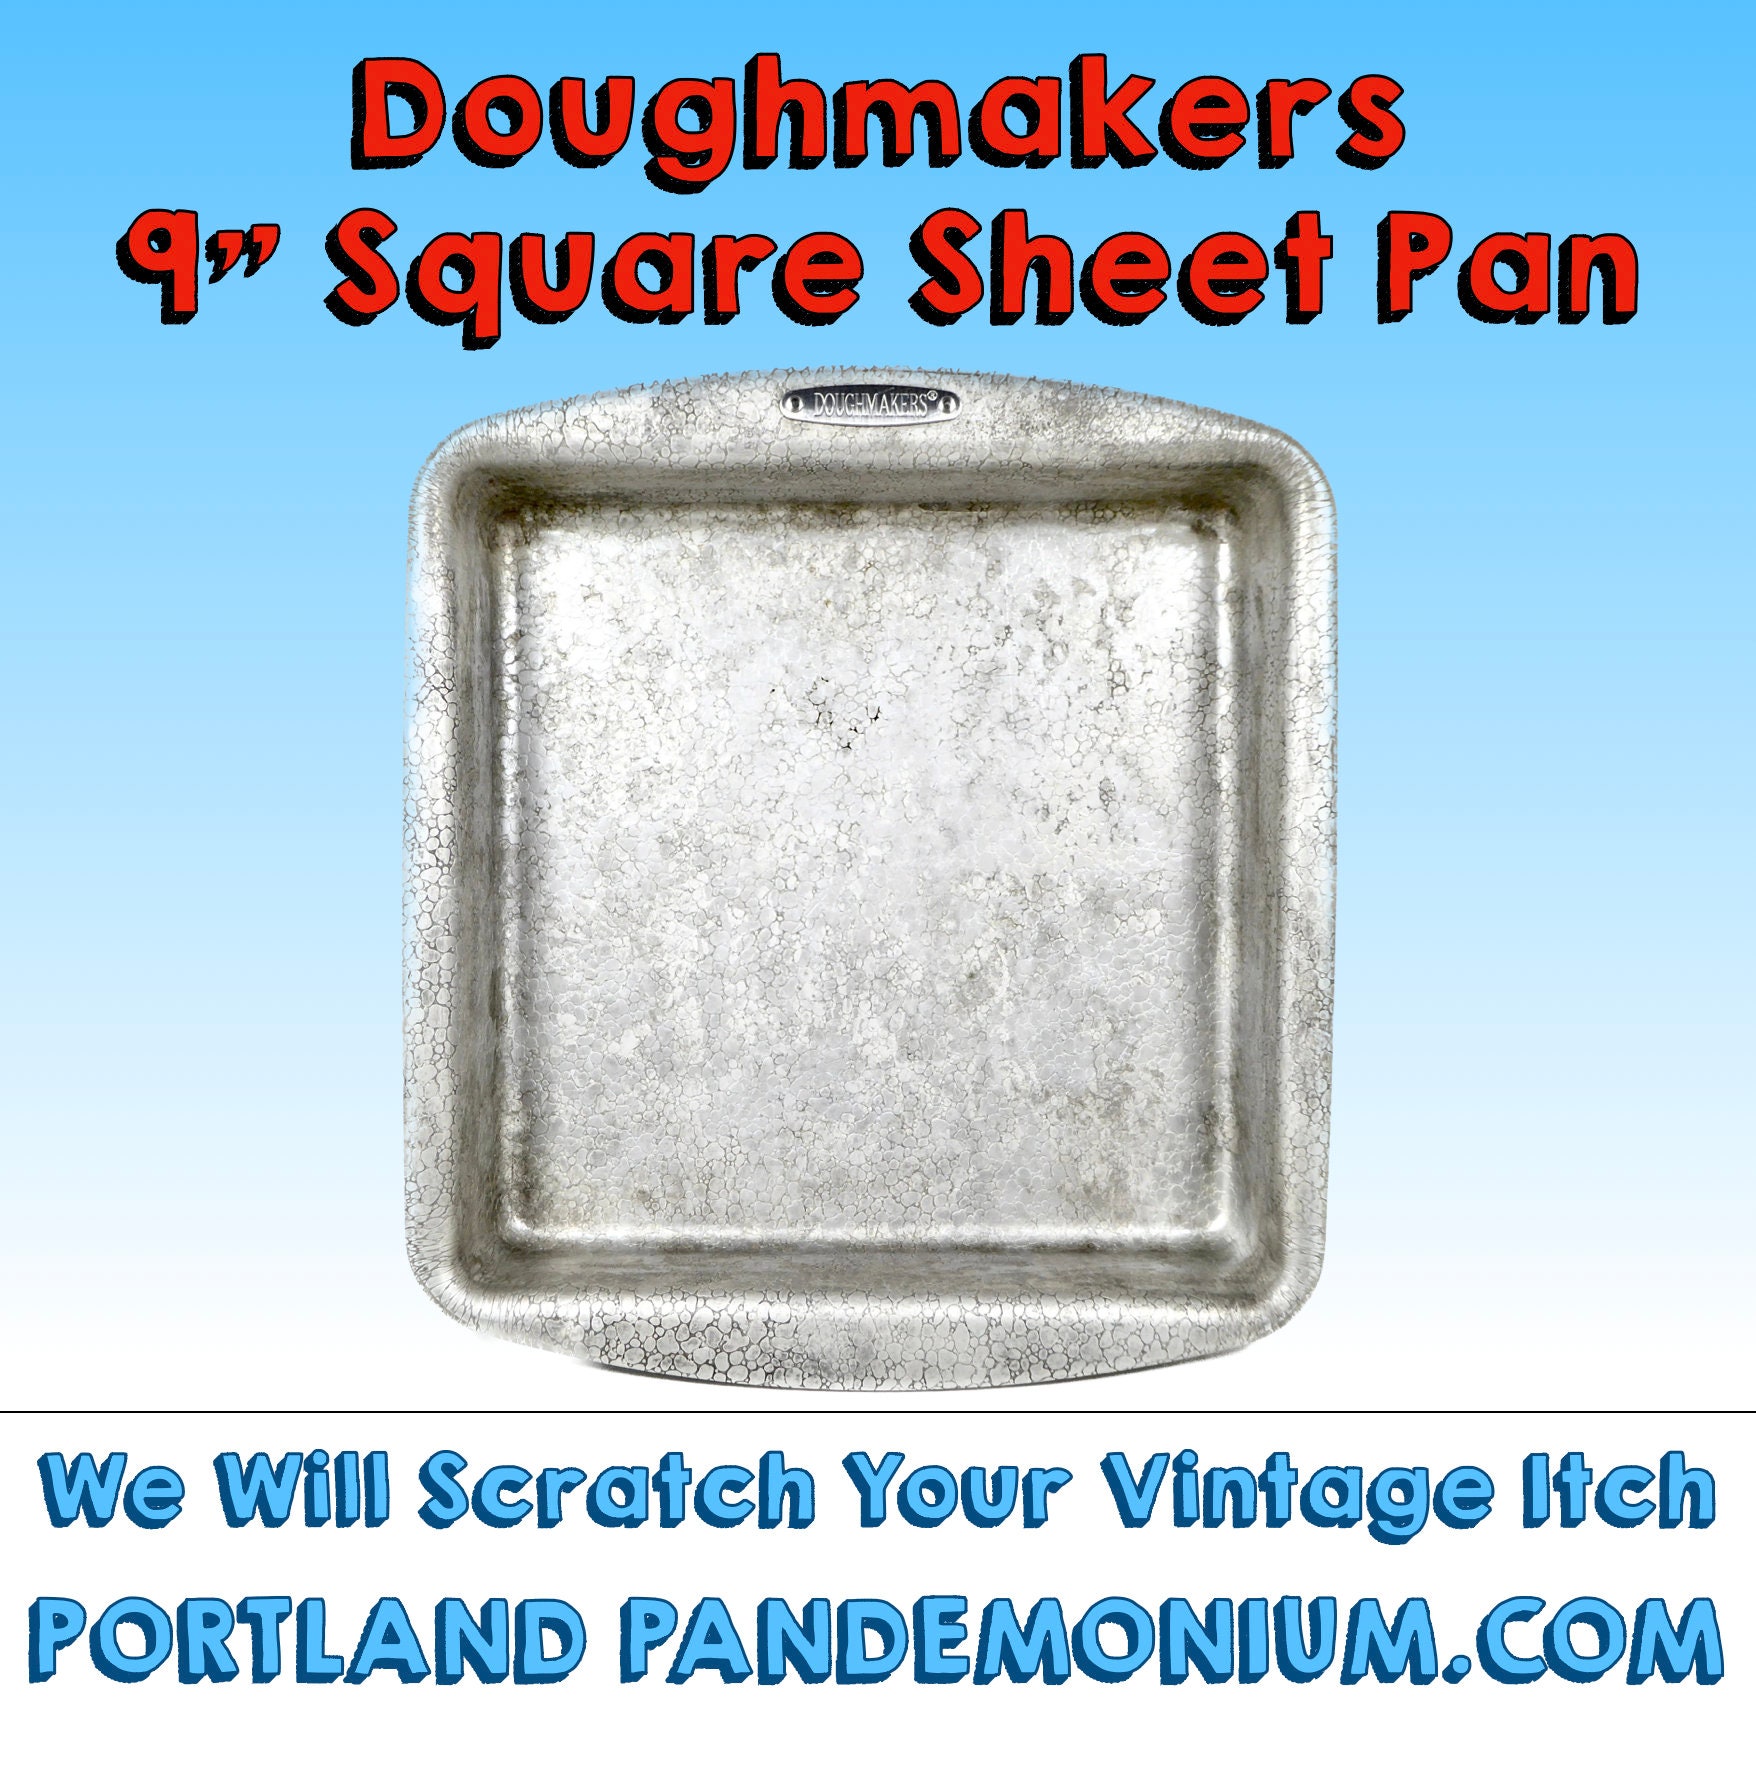 Doughmakers - GIFTS & THINGS